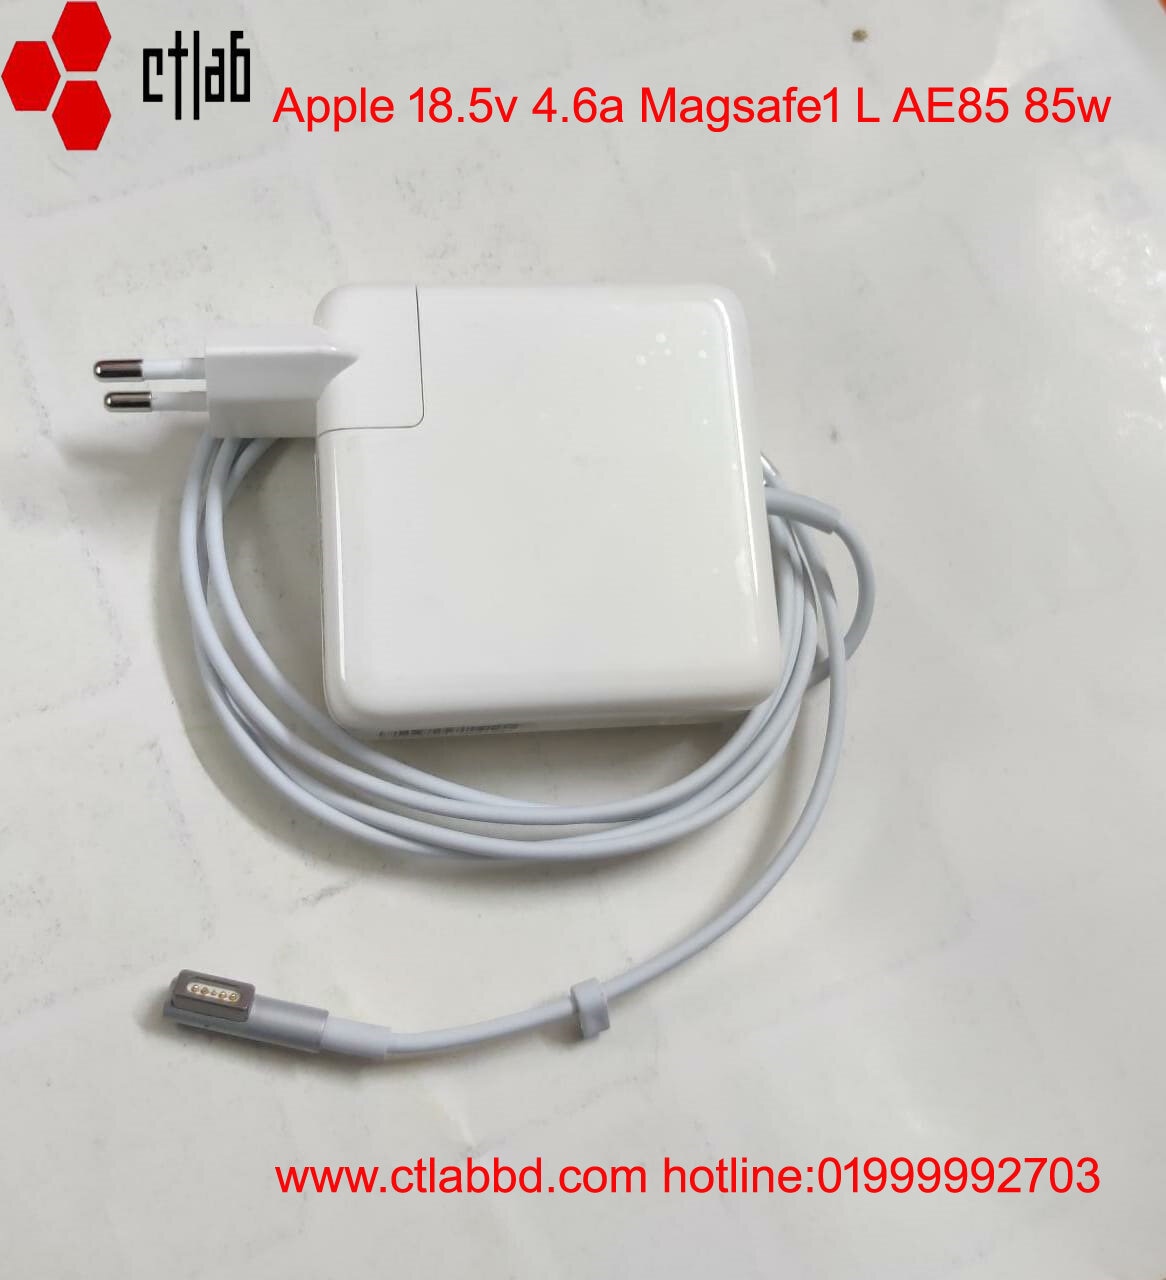 Apple 85W MagSafe Power Adapter